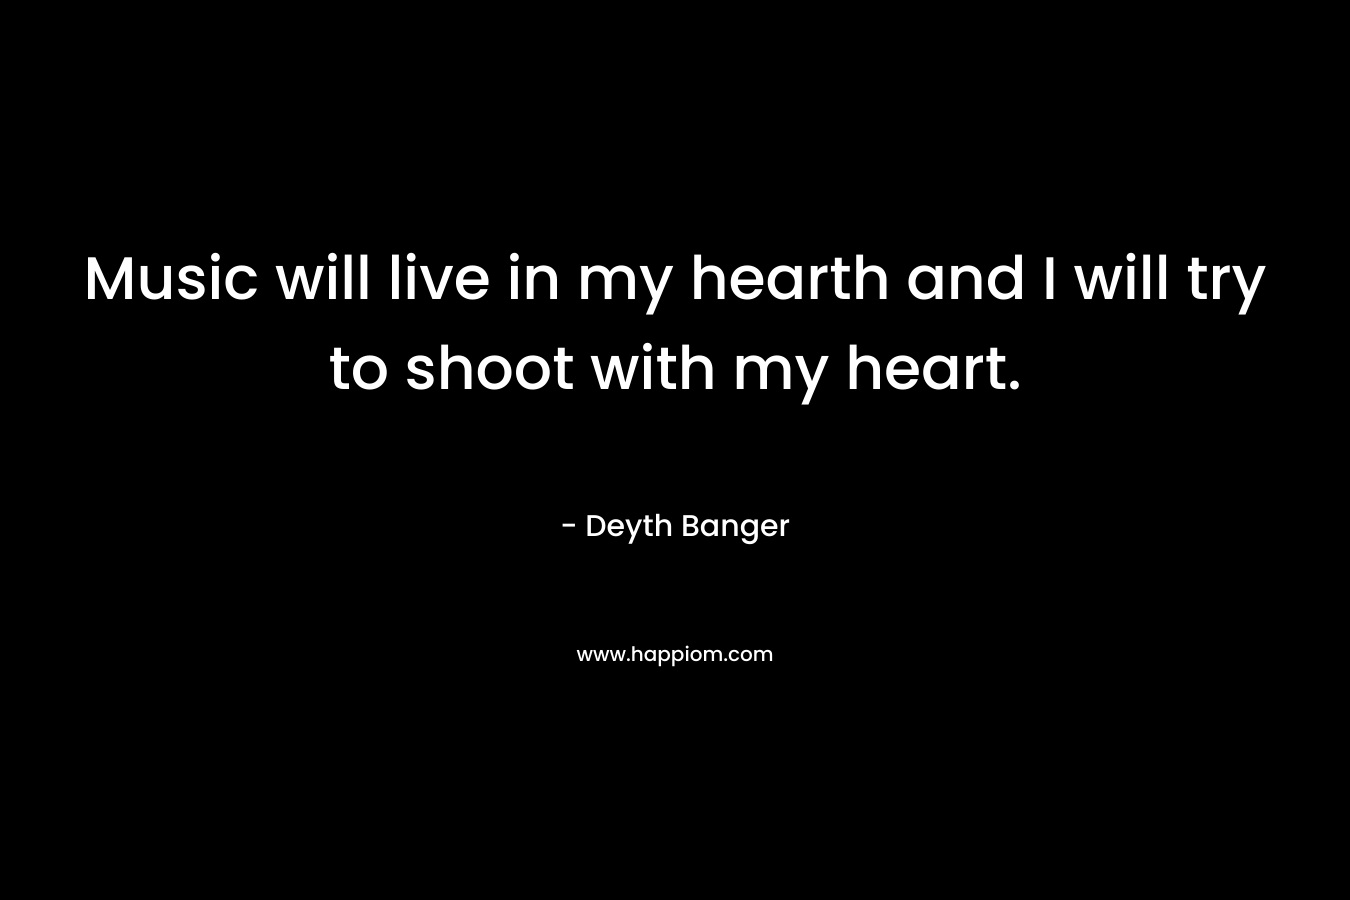 Music will live in my hearth and I will try to shoot with my heart. – Deyth Banger